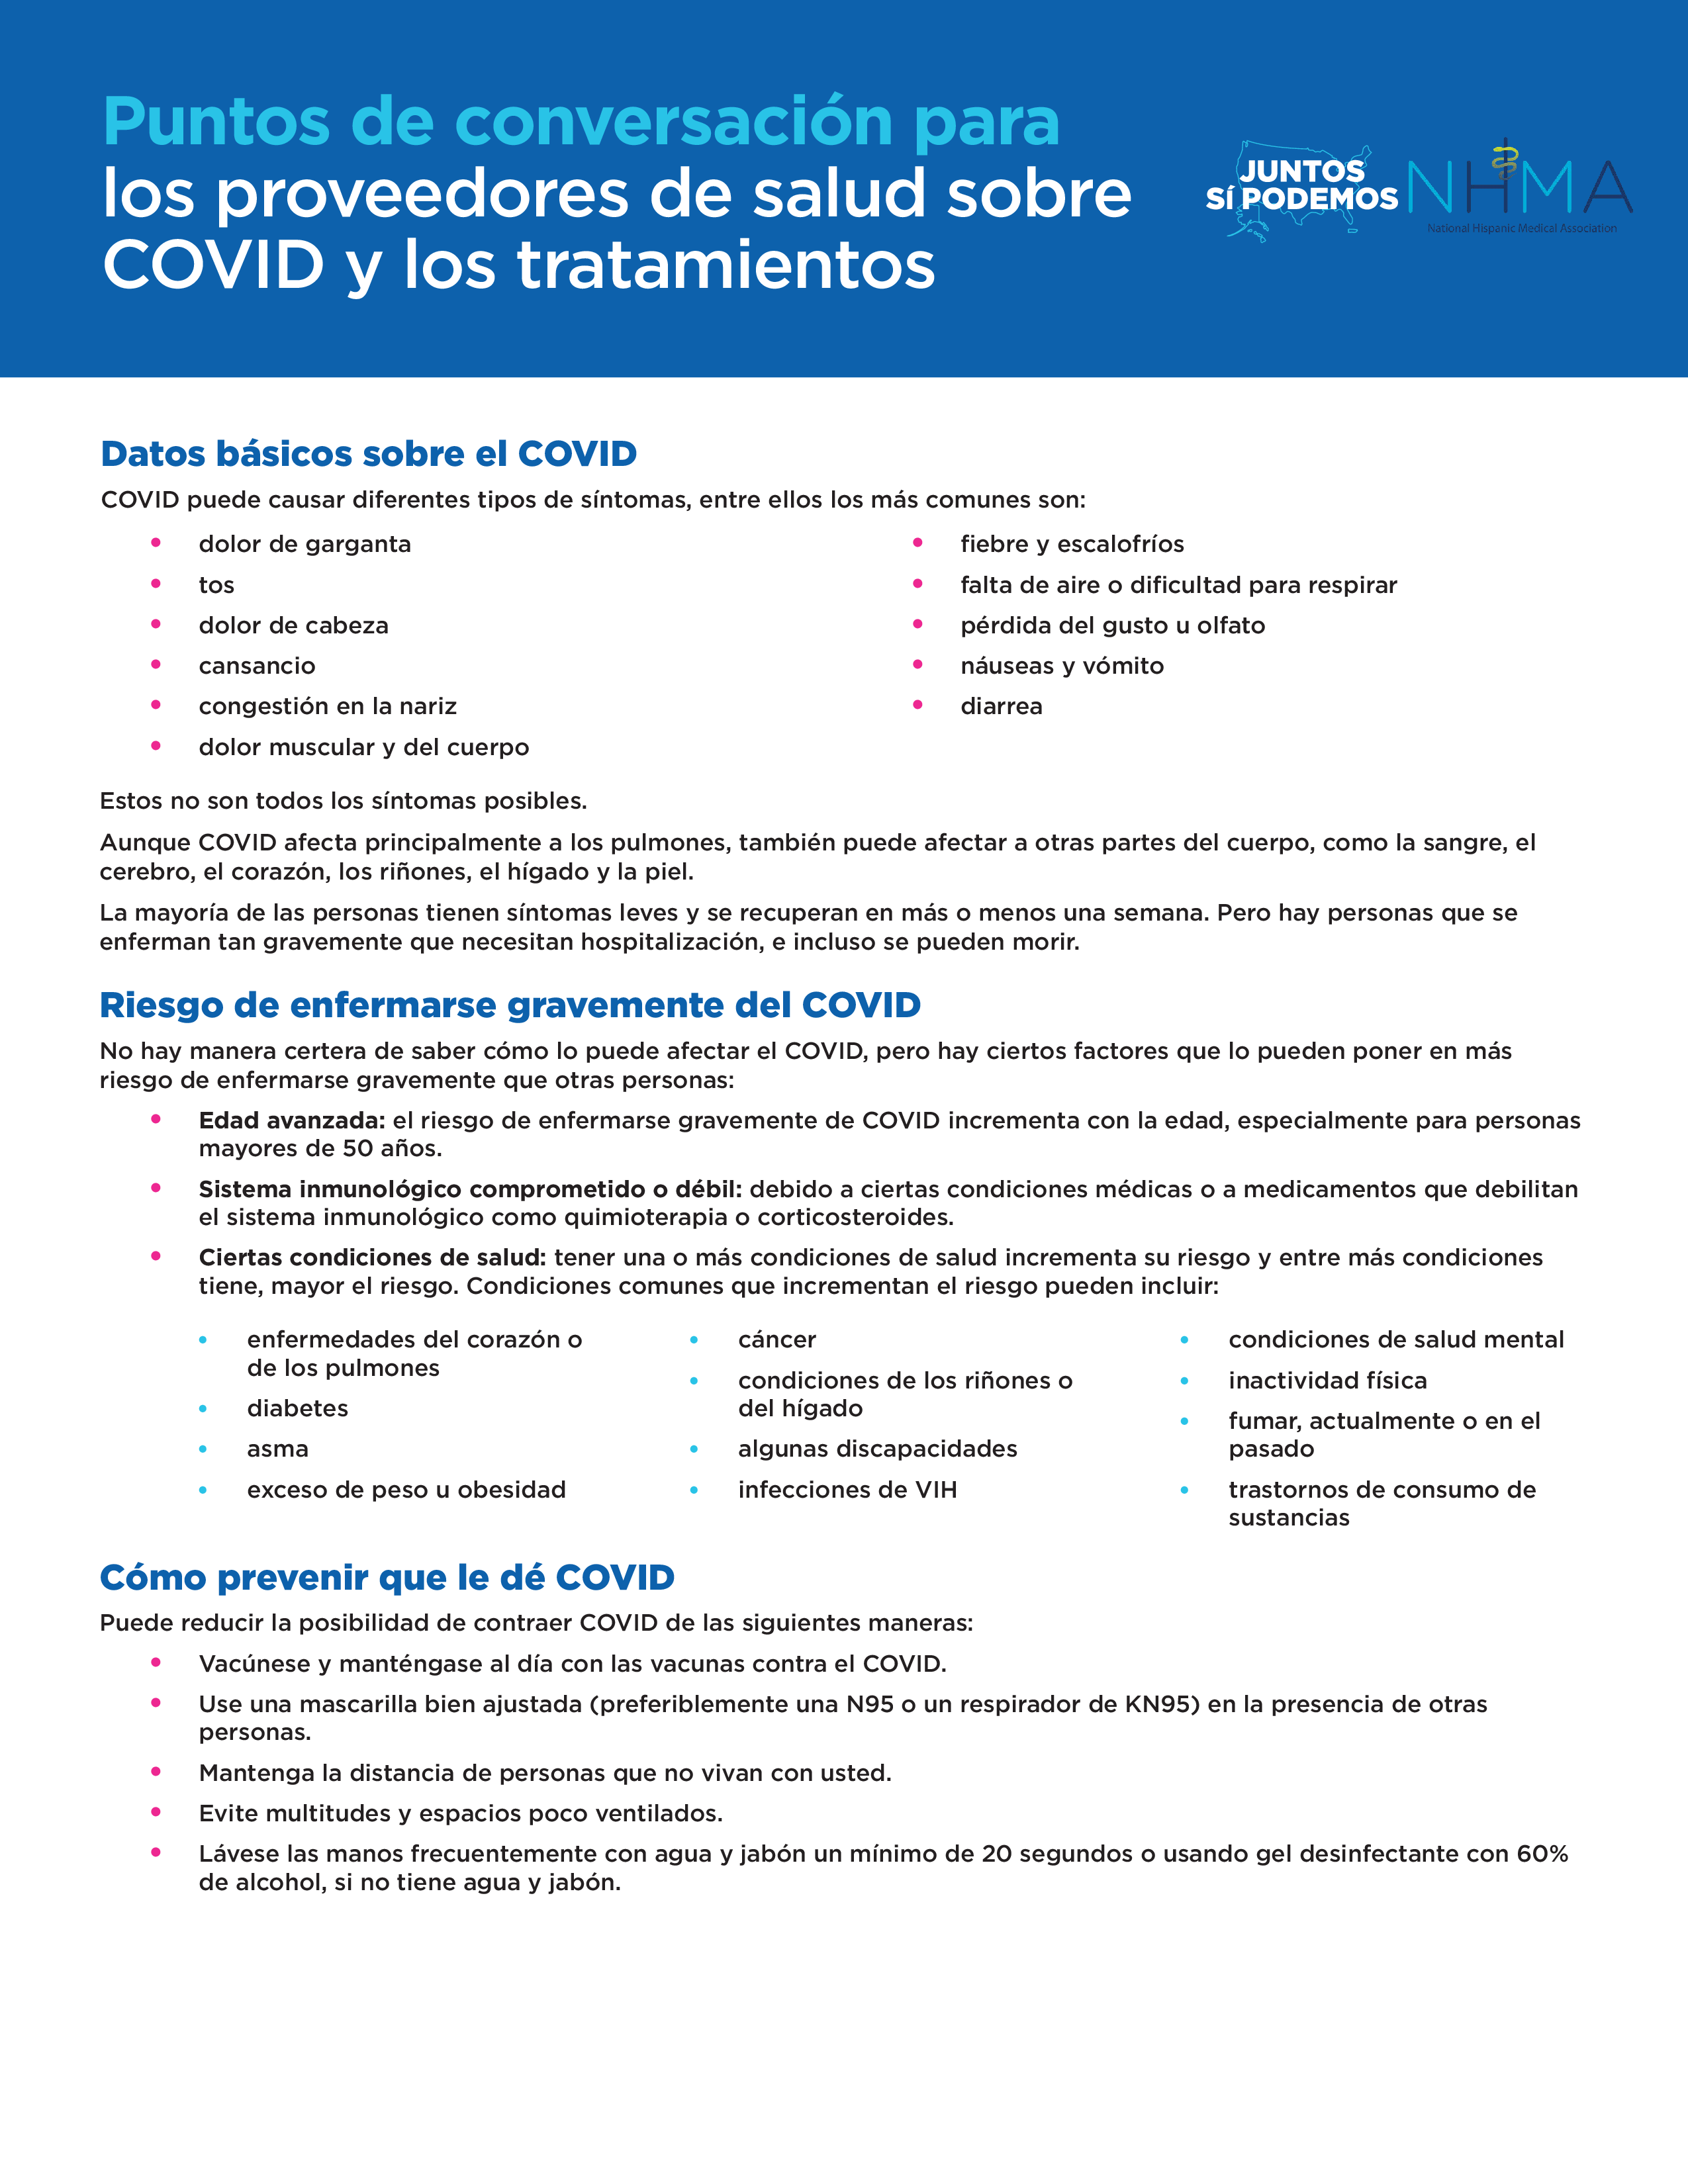 Factsheet on talking points and treatment options on COVID-19 for health care providers with "We Can DO This" and "NHMA" logo at the top right corner.